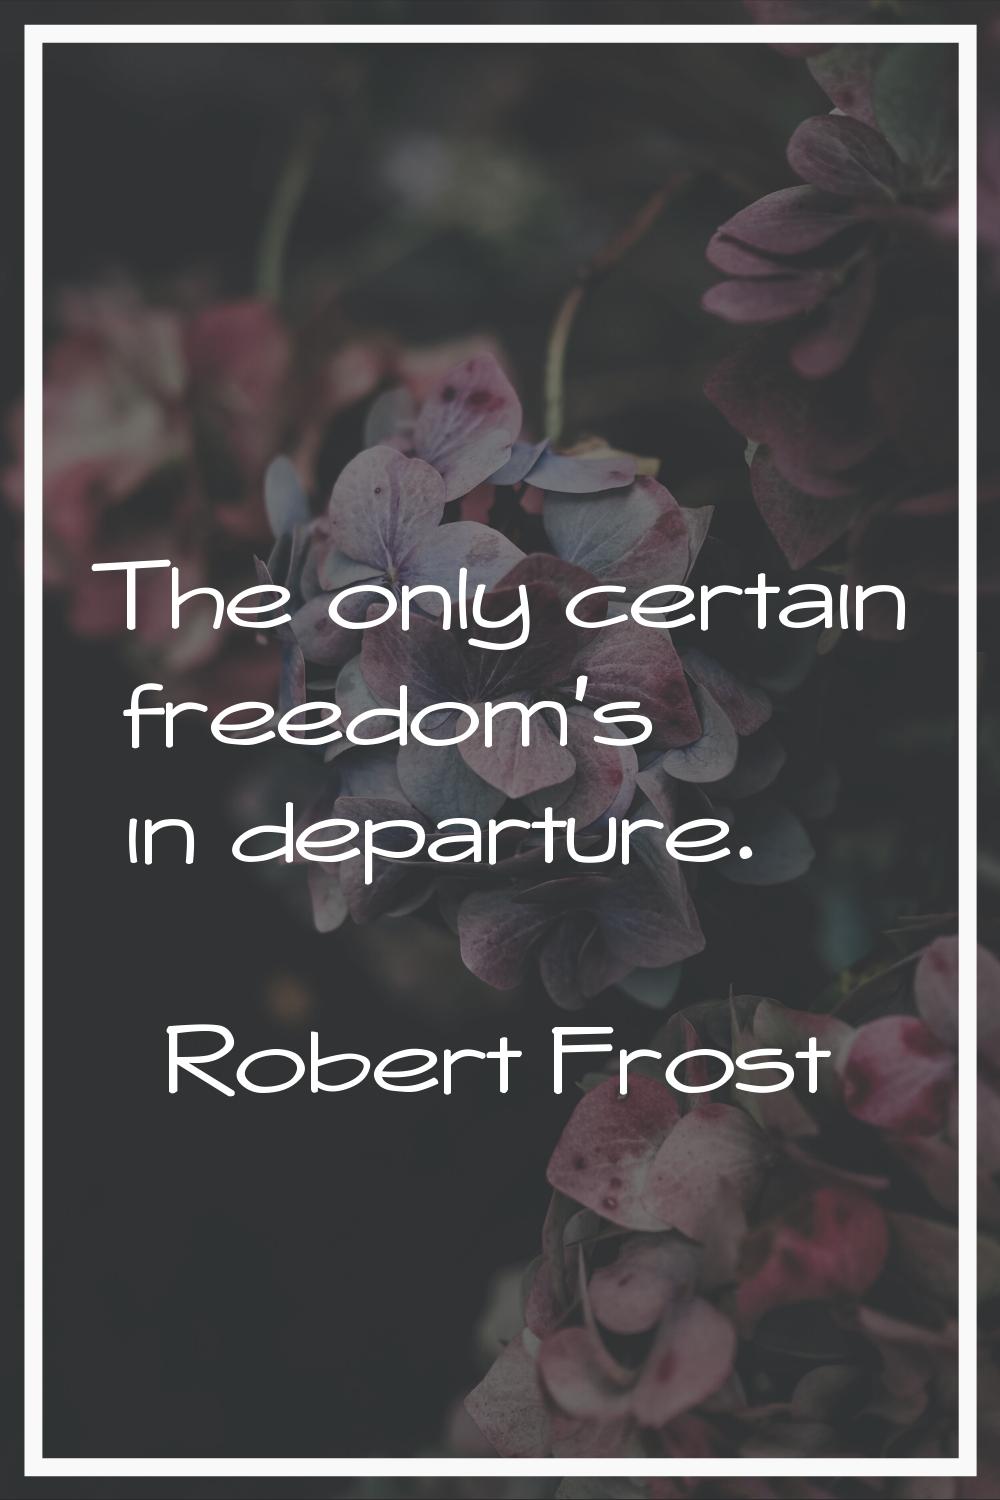 The only certain freedom's in departure.